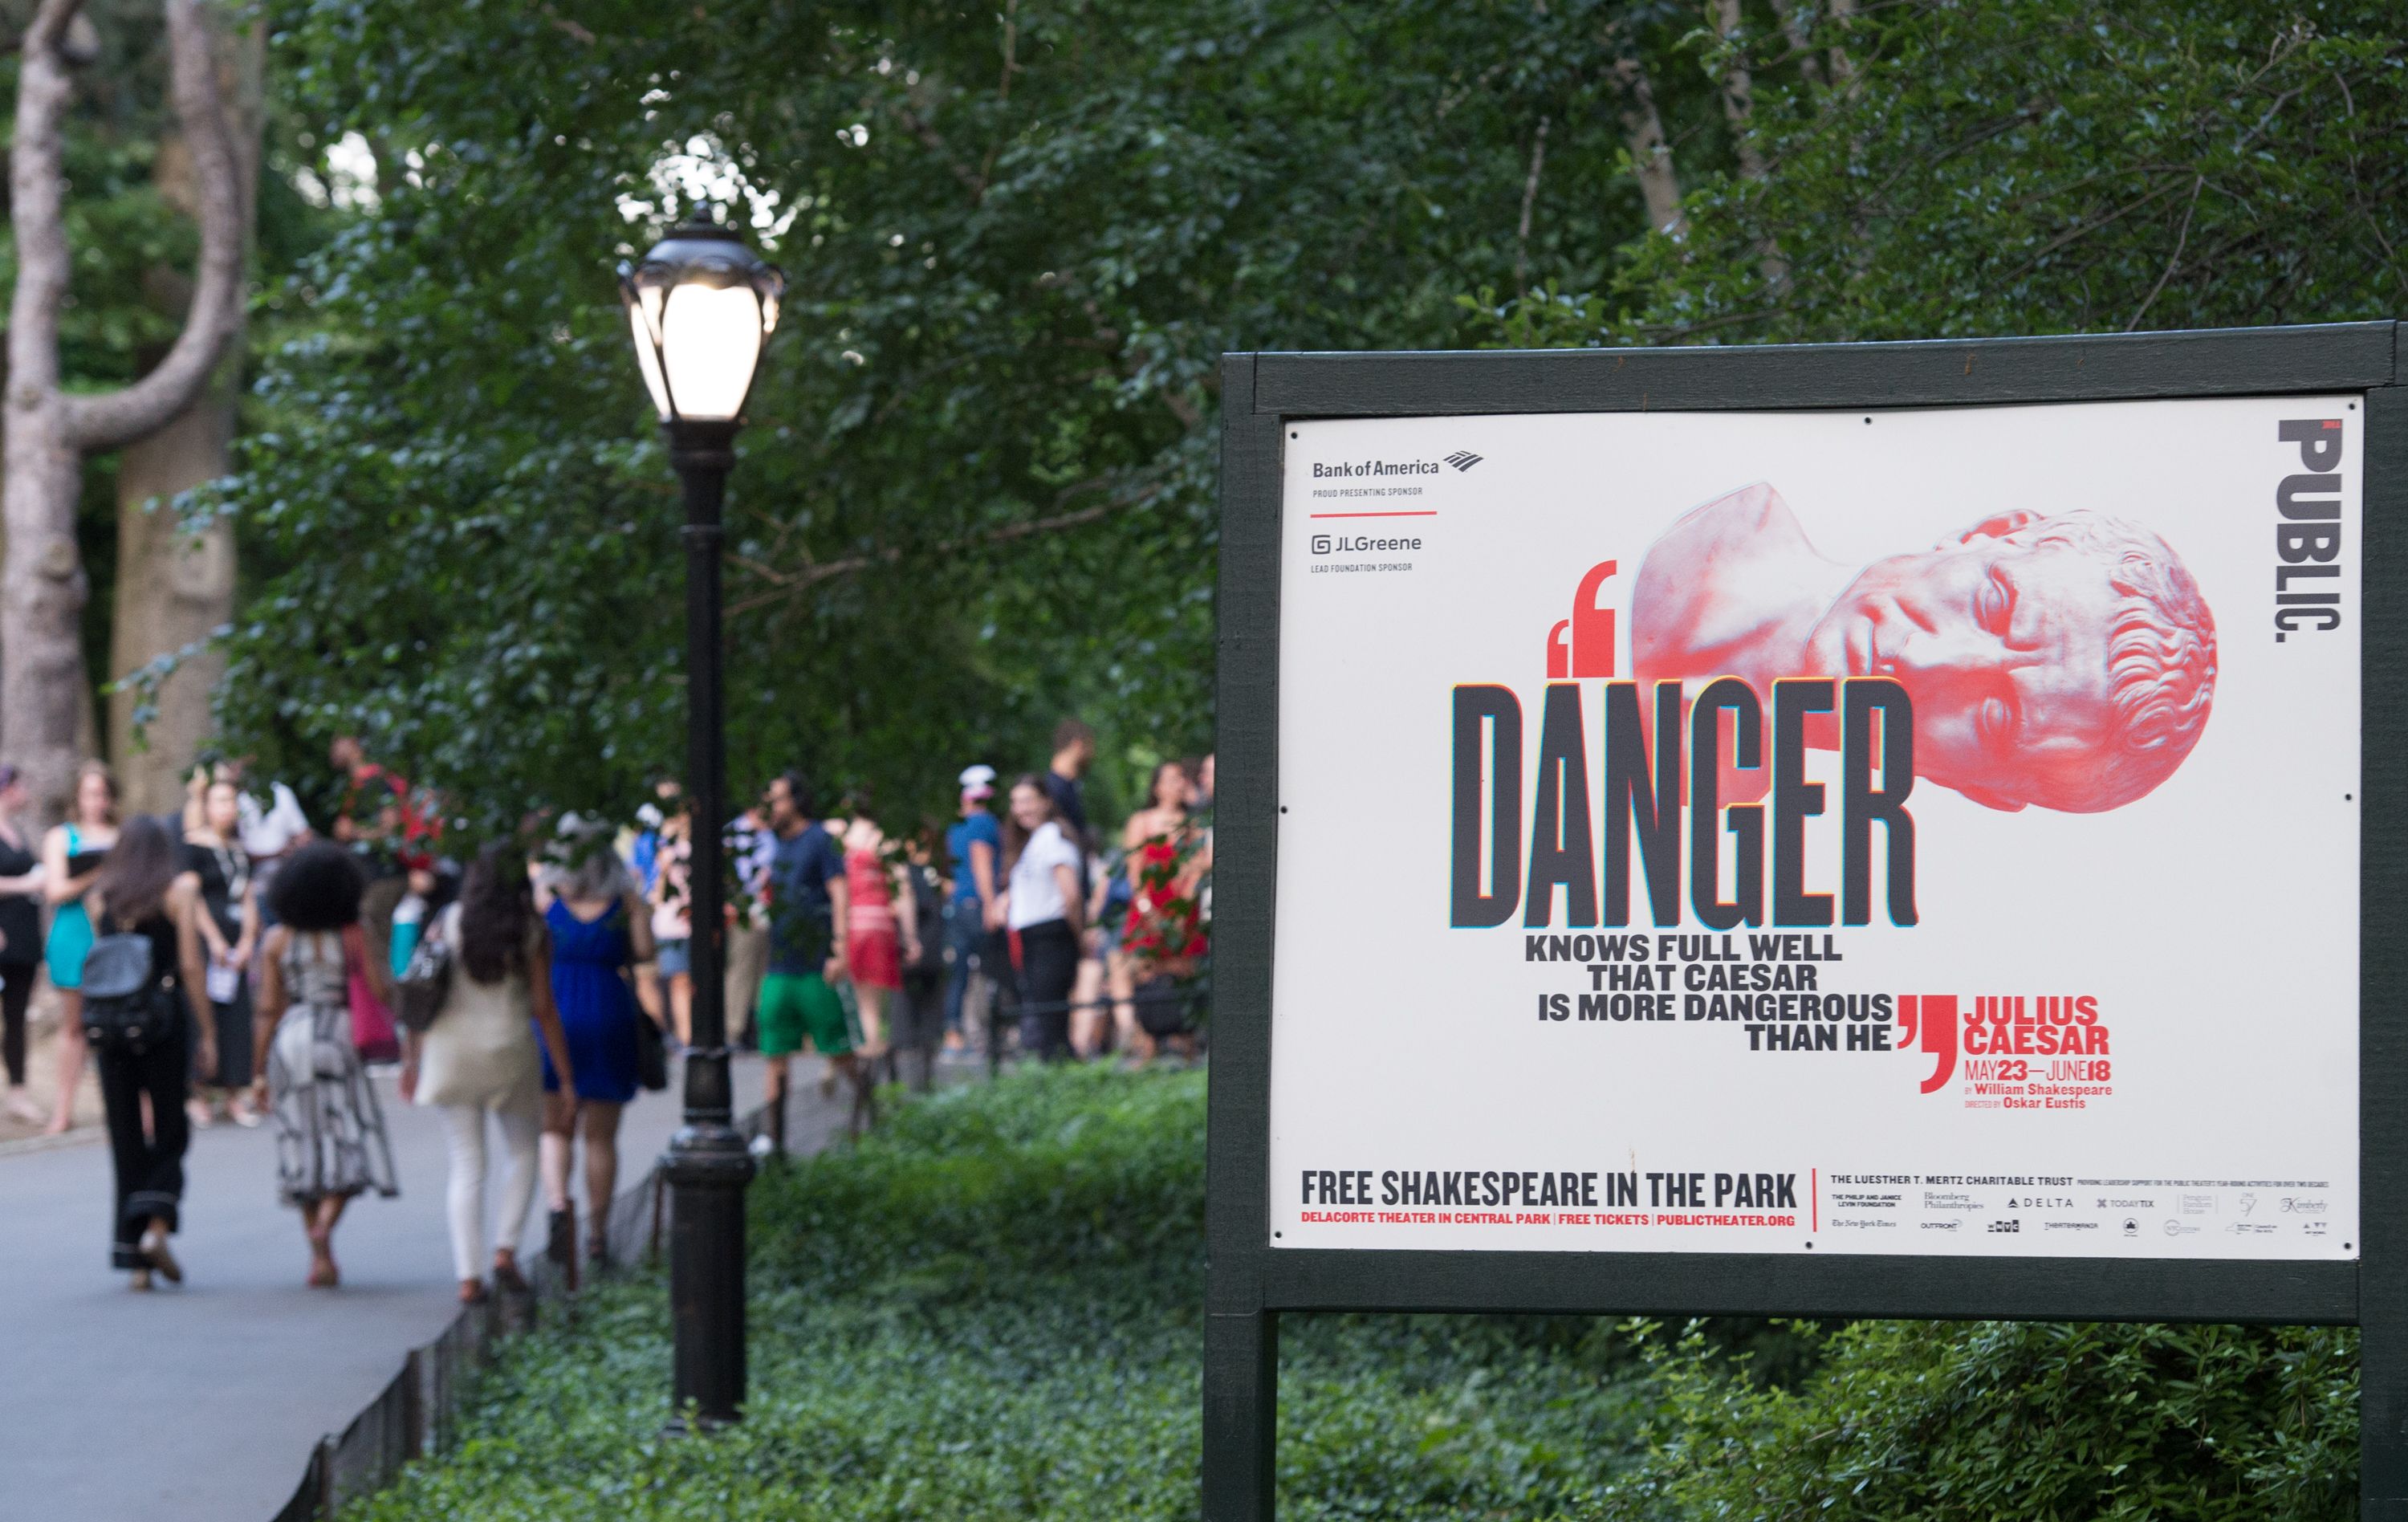 People arrive for the opening night of Shakespeare in the Park's production of Julius Caesar at Central Park's Delacorte Theater on June 12, 2017 in New York.
                      A New York production of Shakespeare's "Julius Caesar" drawing parallels between the assassinated Roman ruler and Donald Trump was in the eye of a growing storm, abandoned by corporate sponsors and sparking debate about freedom of expression. The play, which first opened in Central Park on May 23 and runs to June 18, has attracted right-wing outrage for similarities between the way Caesar is depicted and the Republican commander-in-chief, who is hugely unpopular in New York.
                       / AFP PHOTO / Bryan R. Smith        (Photo credit should read BRYAN R. SMITH/AFP/Getty Images) (BRYAN R. SMITH&mdash;AFP/Getty Images)